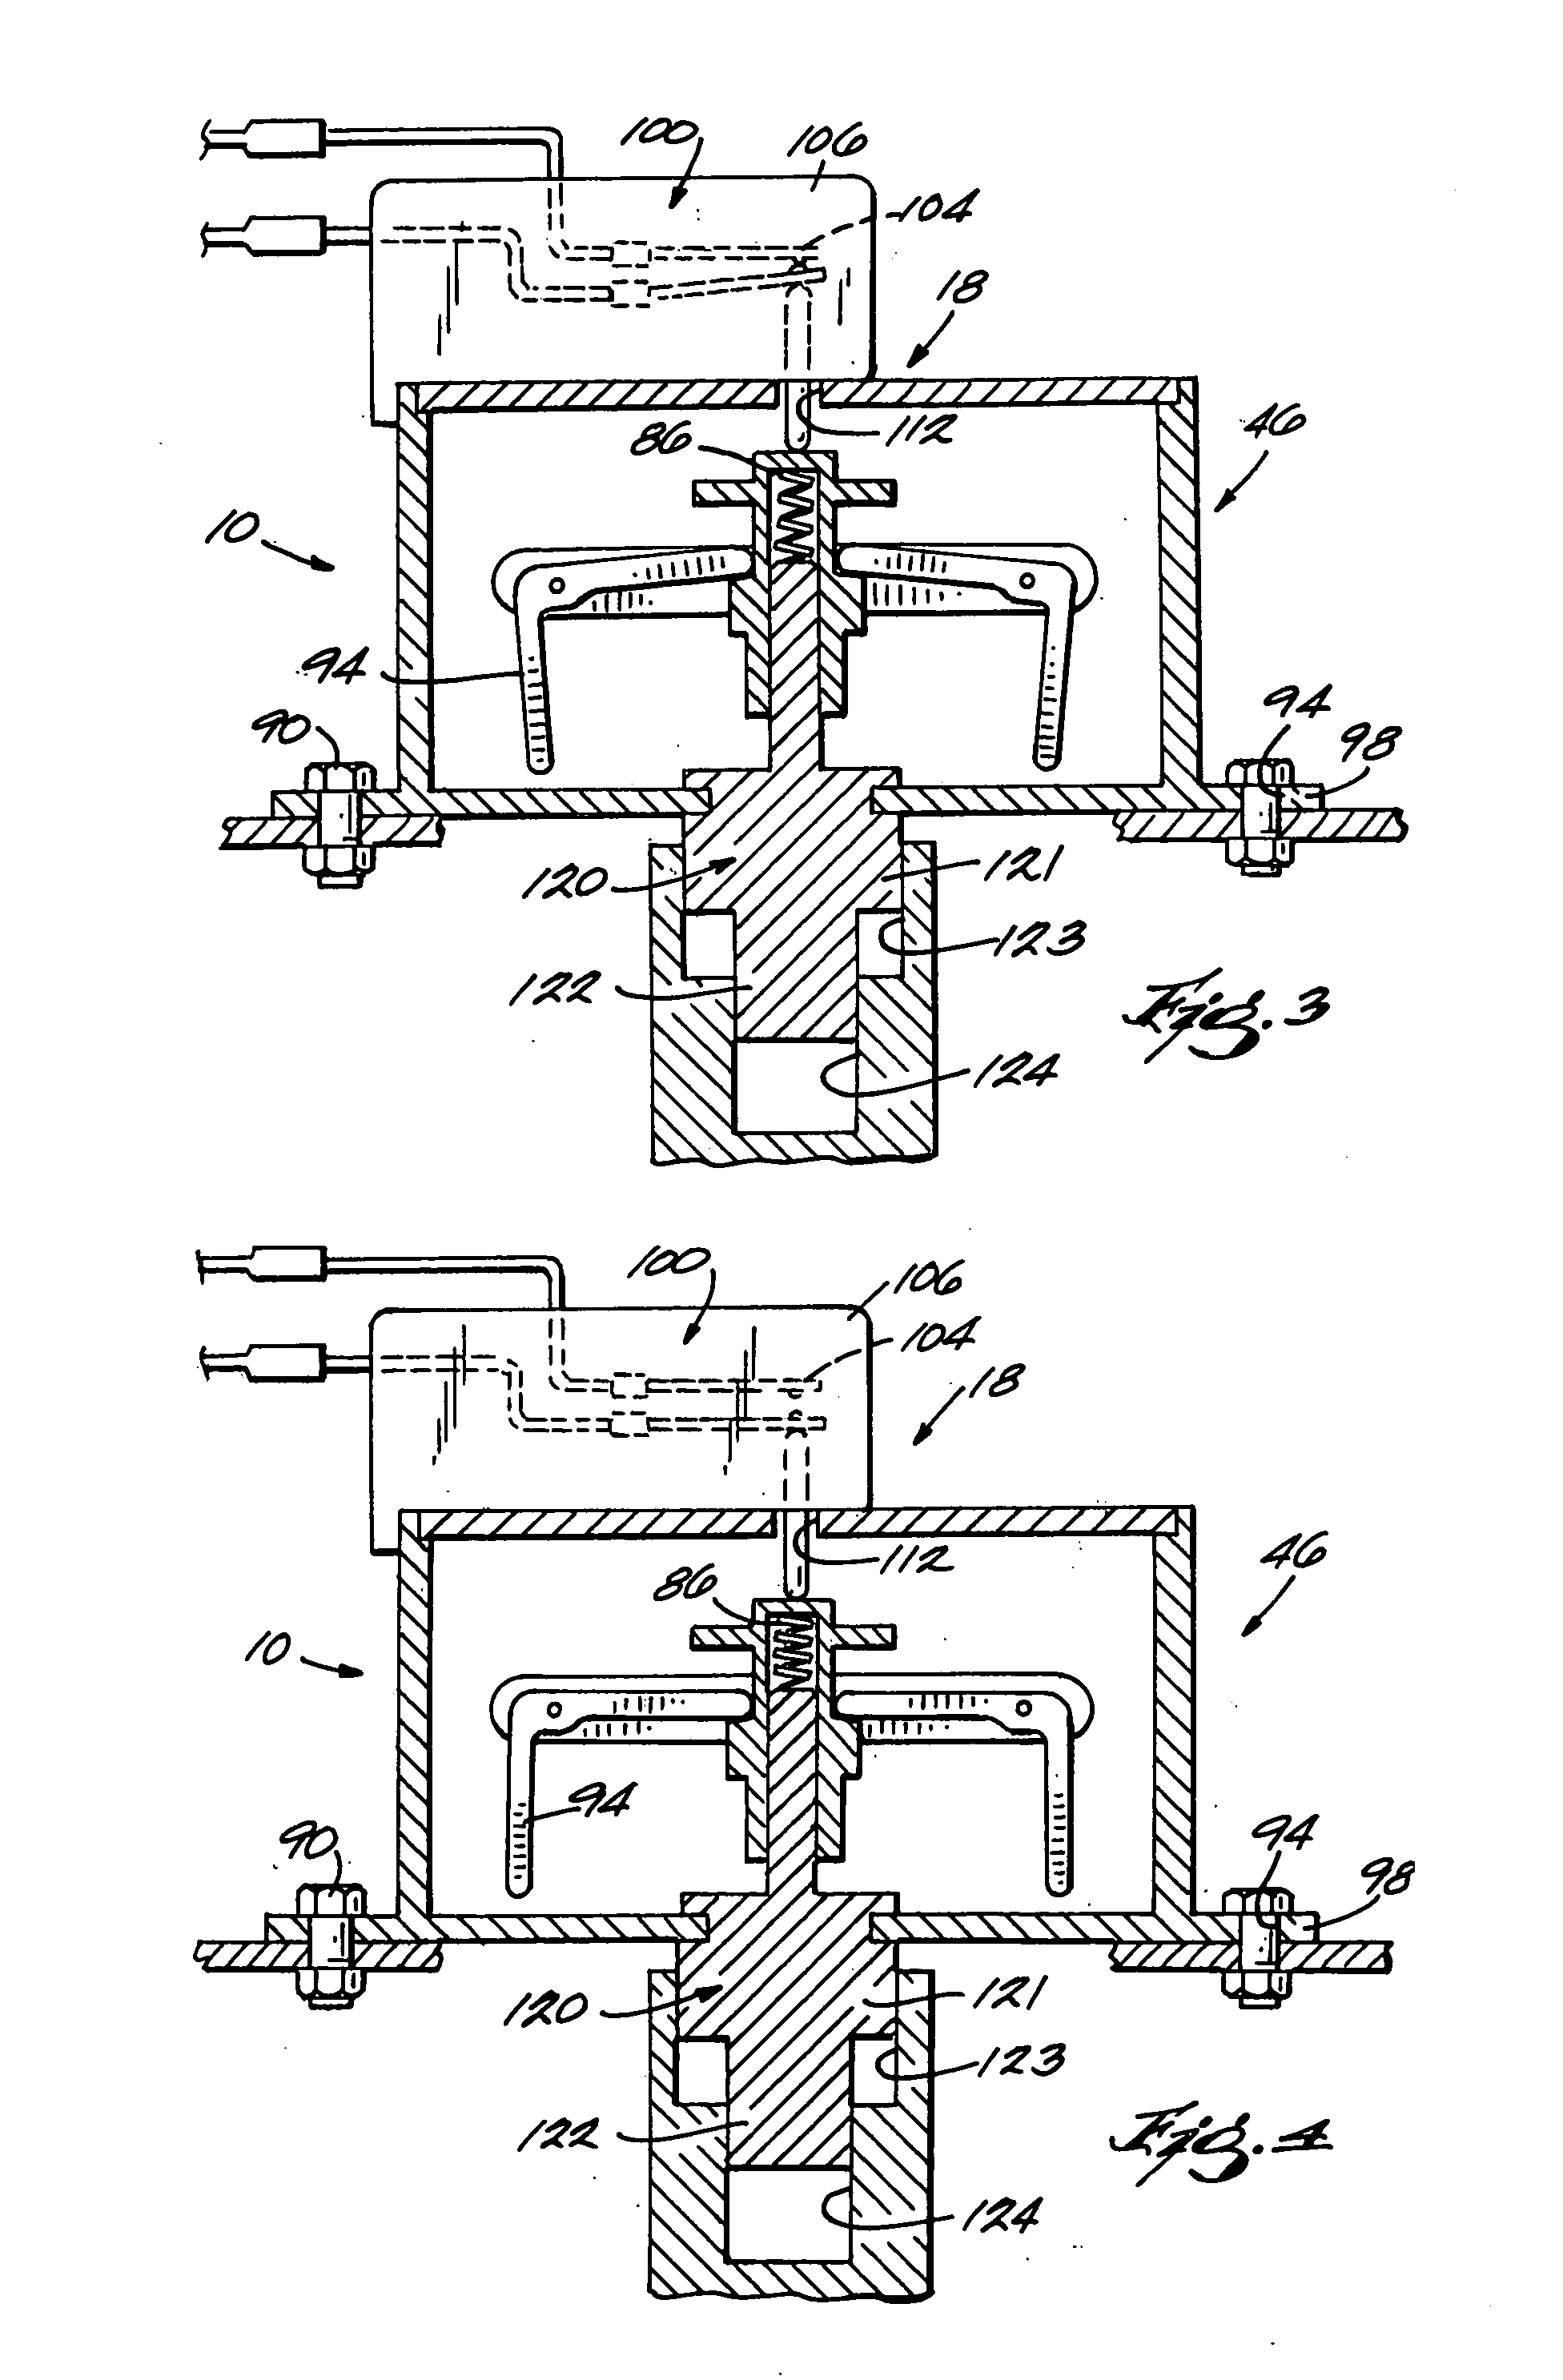 Electric motor assembly with a module attached to a motor housing